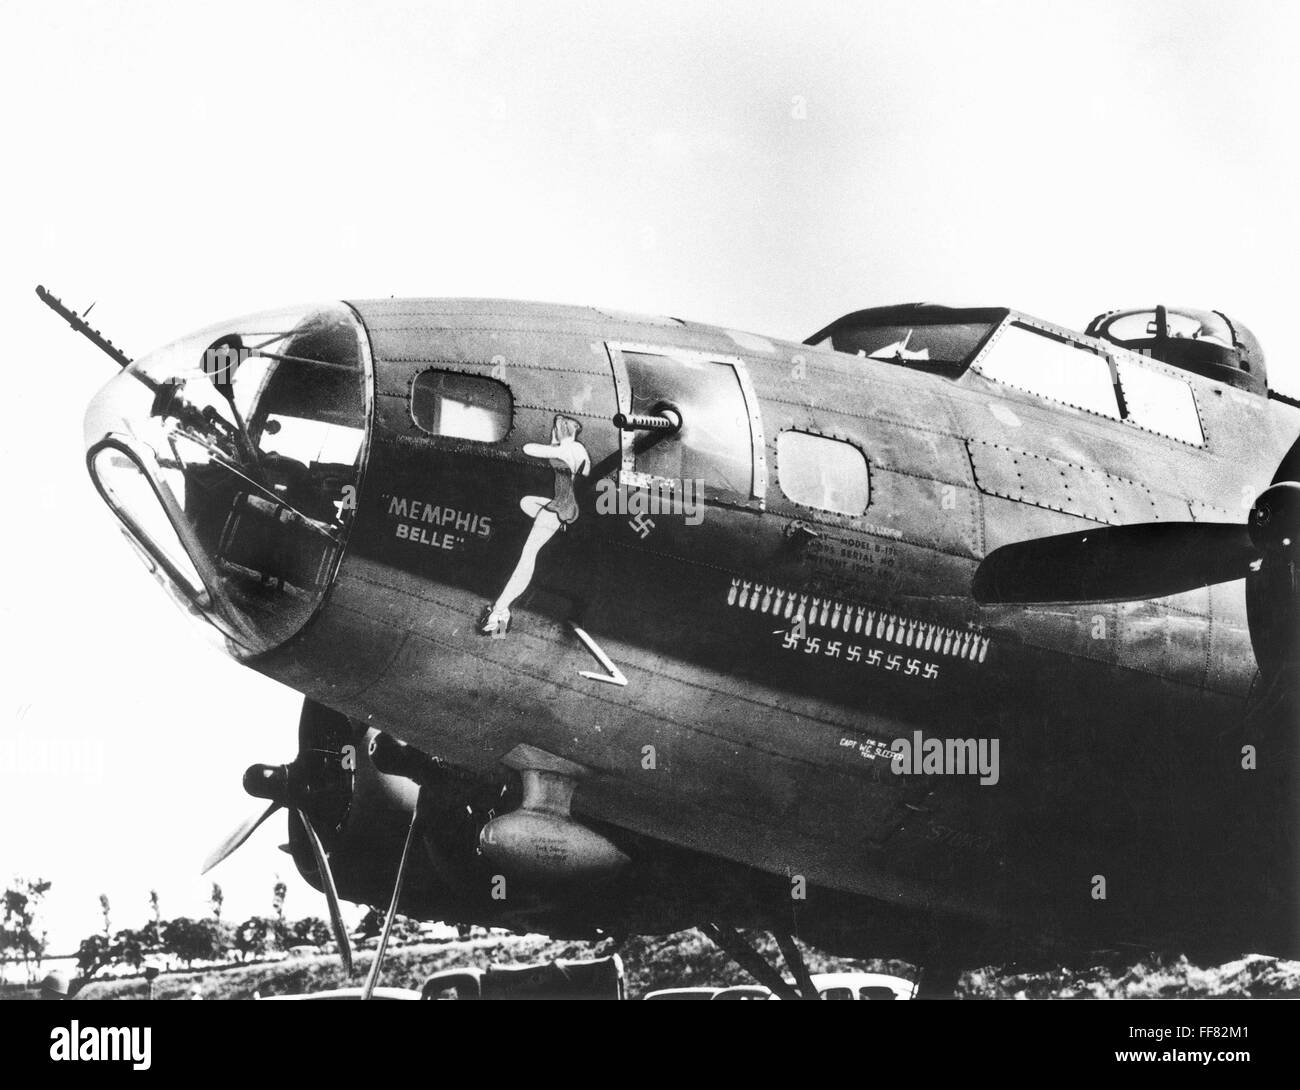 WORLD WAR II: BOMBER./nThe B-17 'Memphis Belle', one of the most famous ...